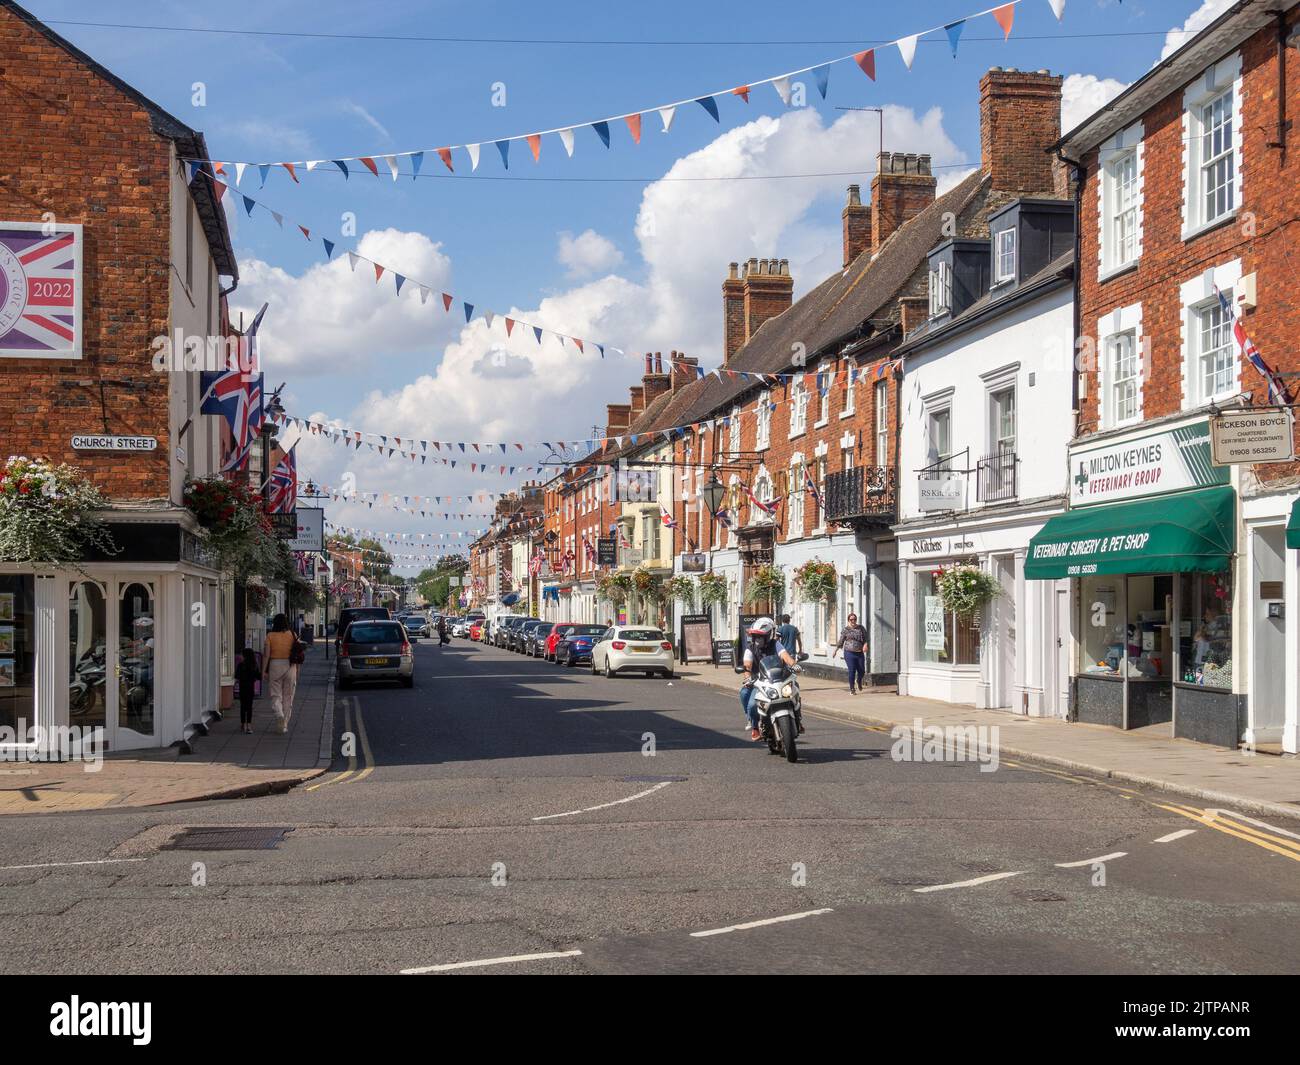 Typical British High Street with a mix of chain and independent retailers, Stony Stratford, Buckinghamshire, UK Stock Photo